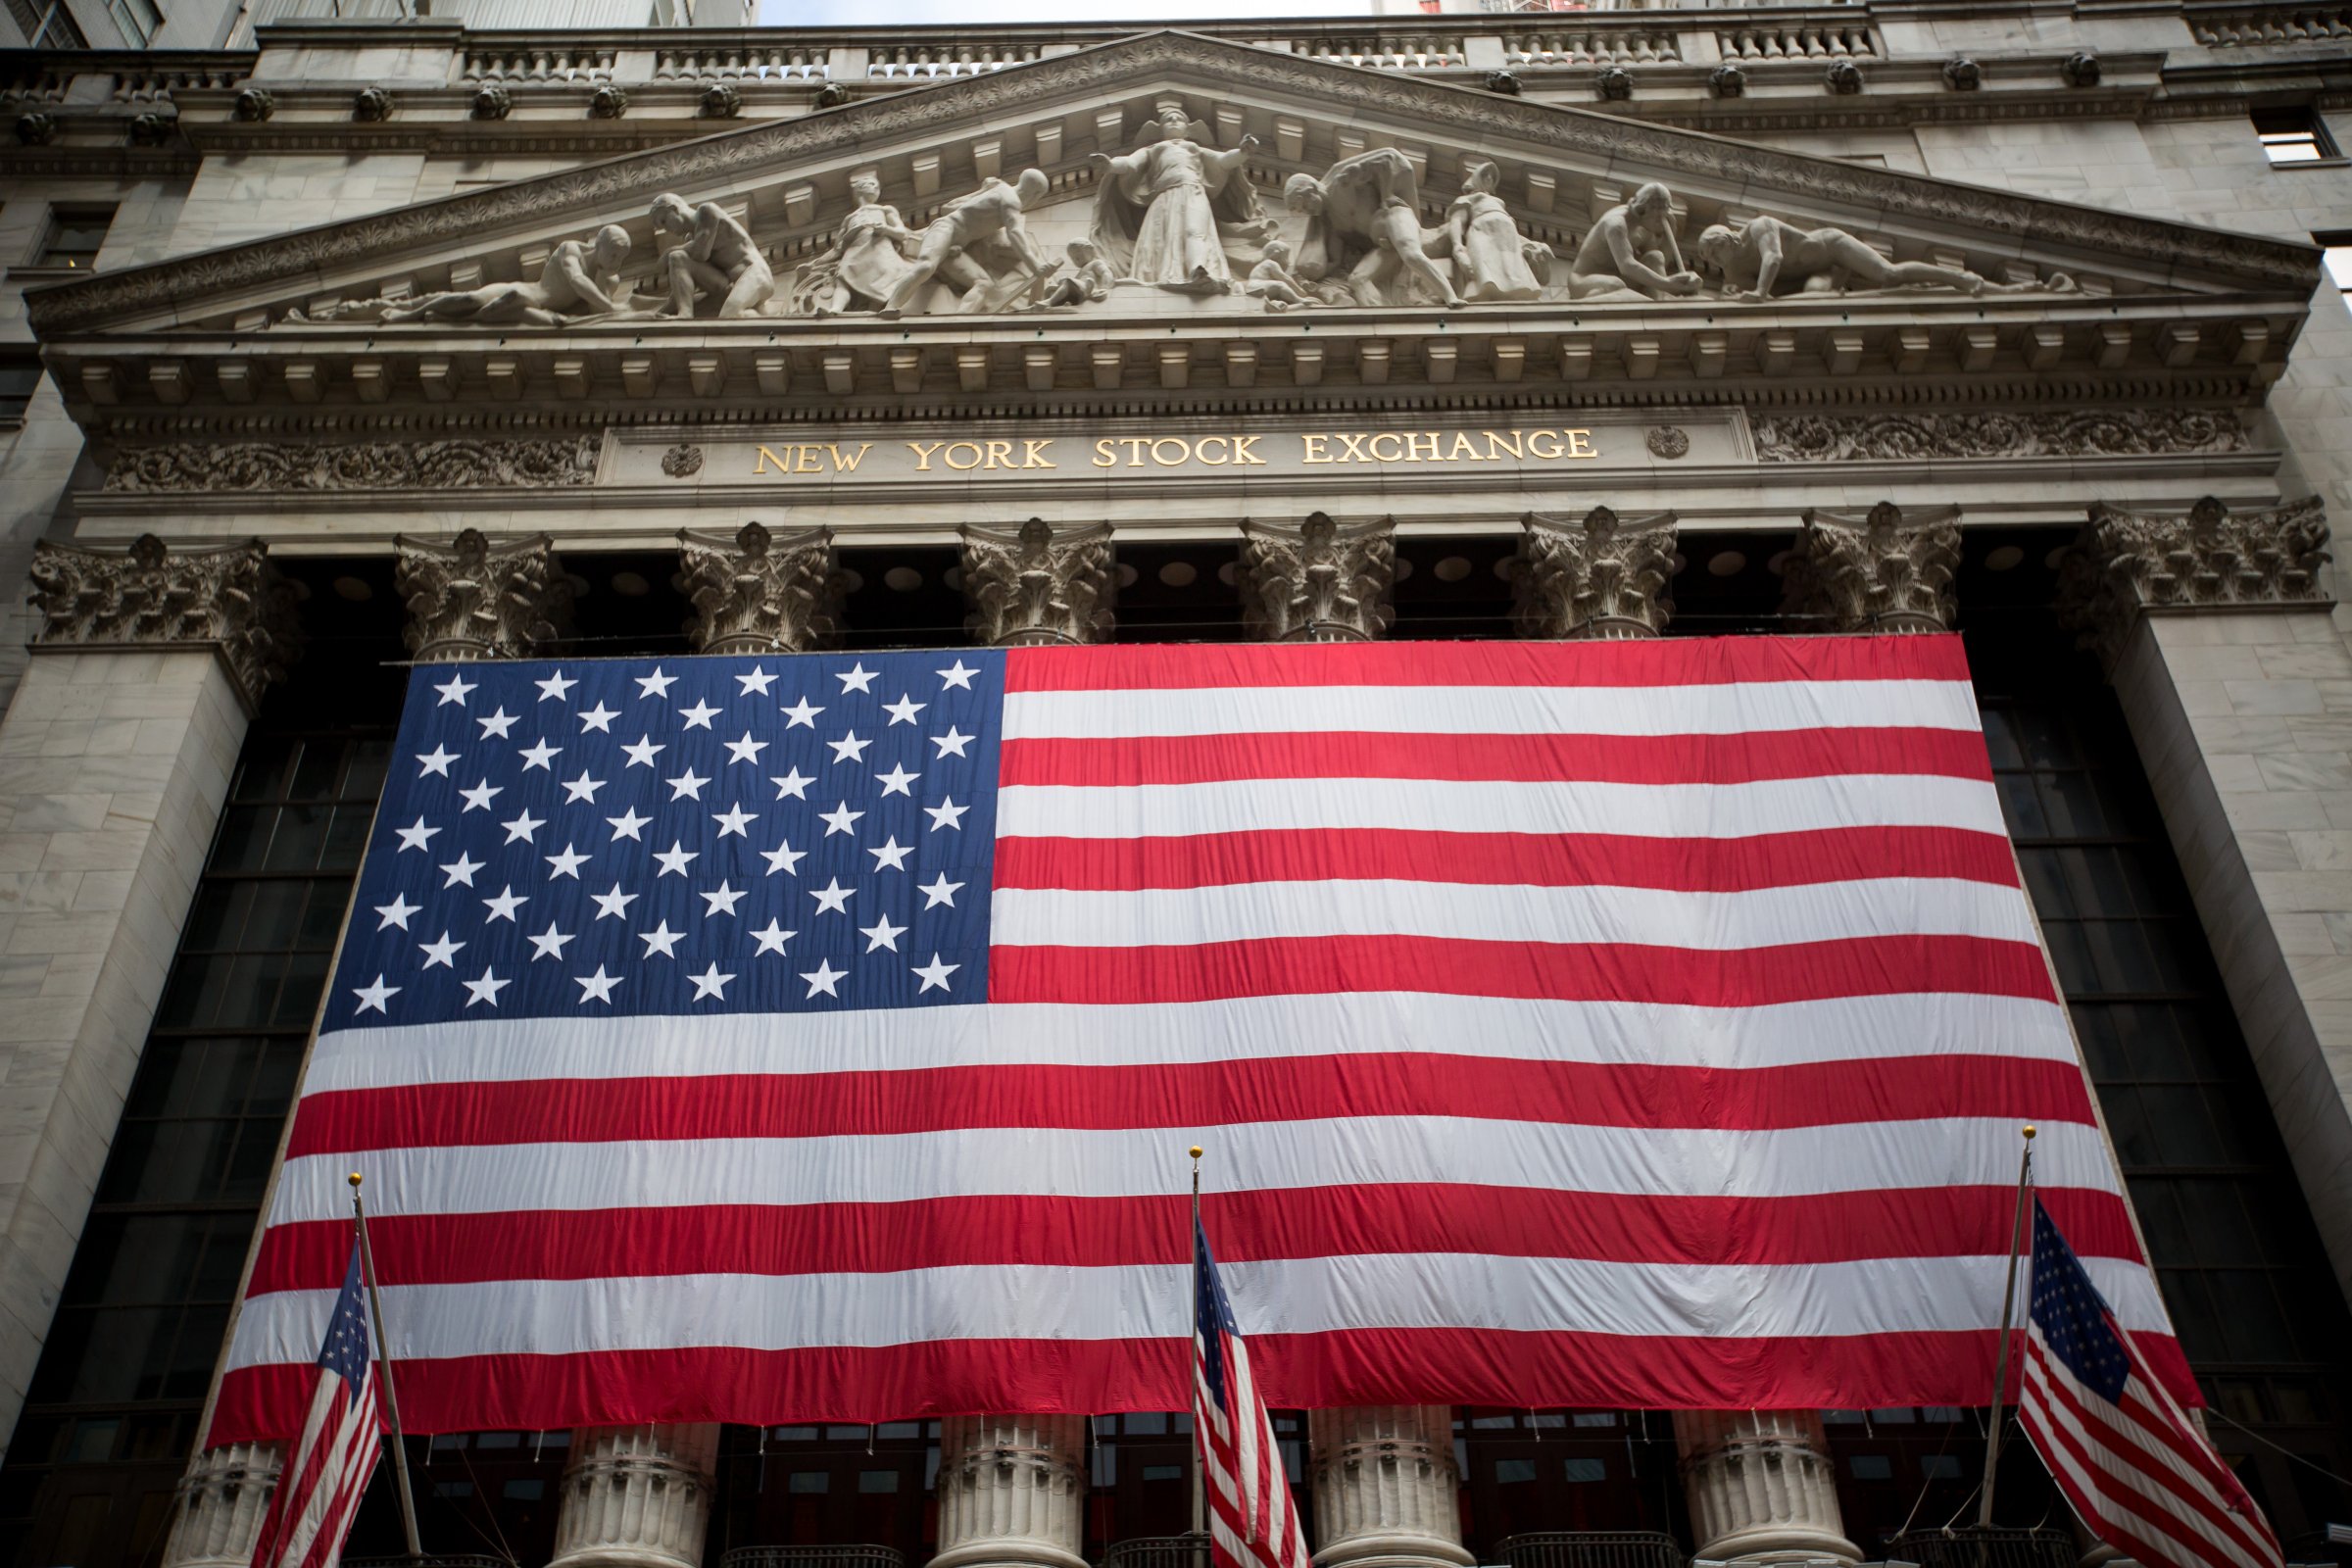 An American flag is displayed outside the New York Stock Exchange (NYSE) stands in New York, U.S., on Tuesday, July 5, 2016.